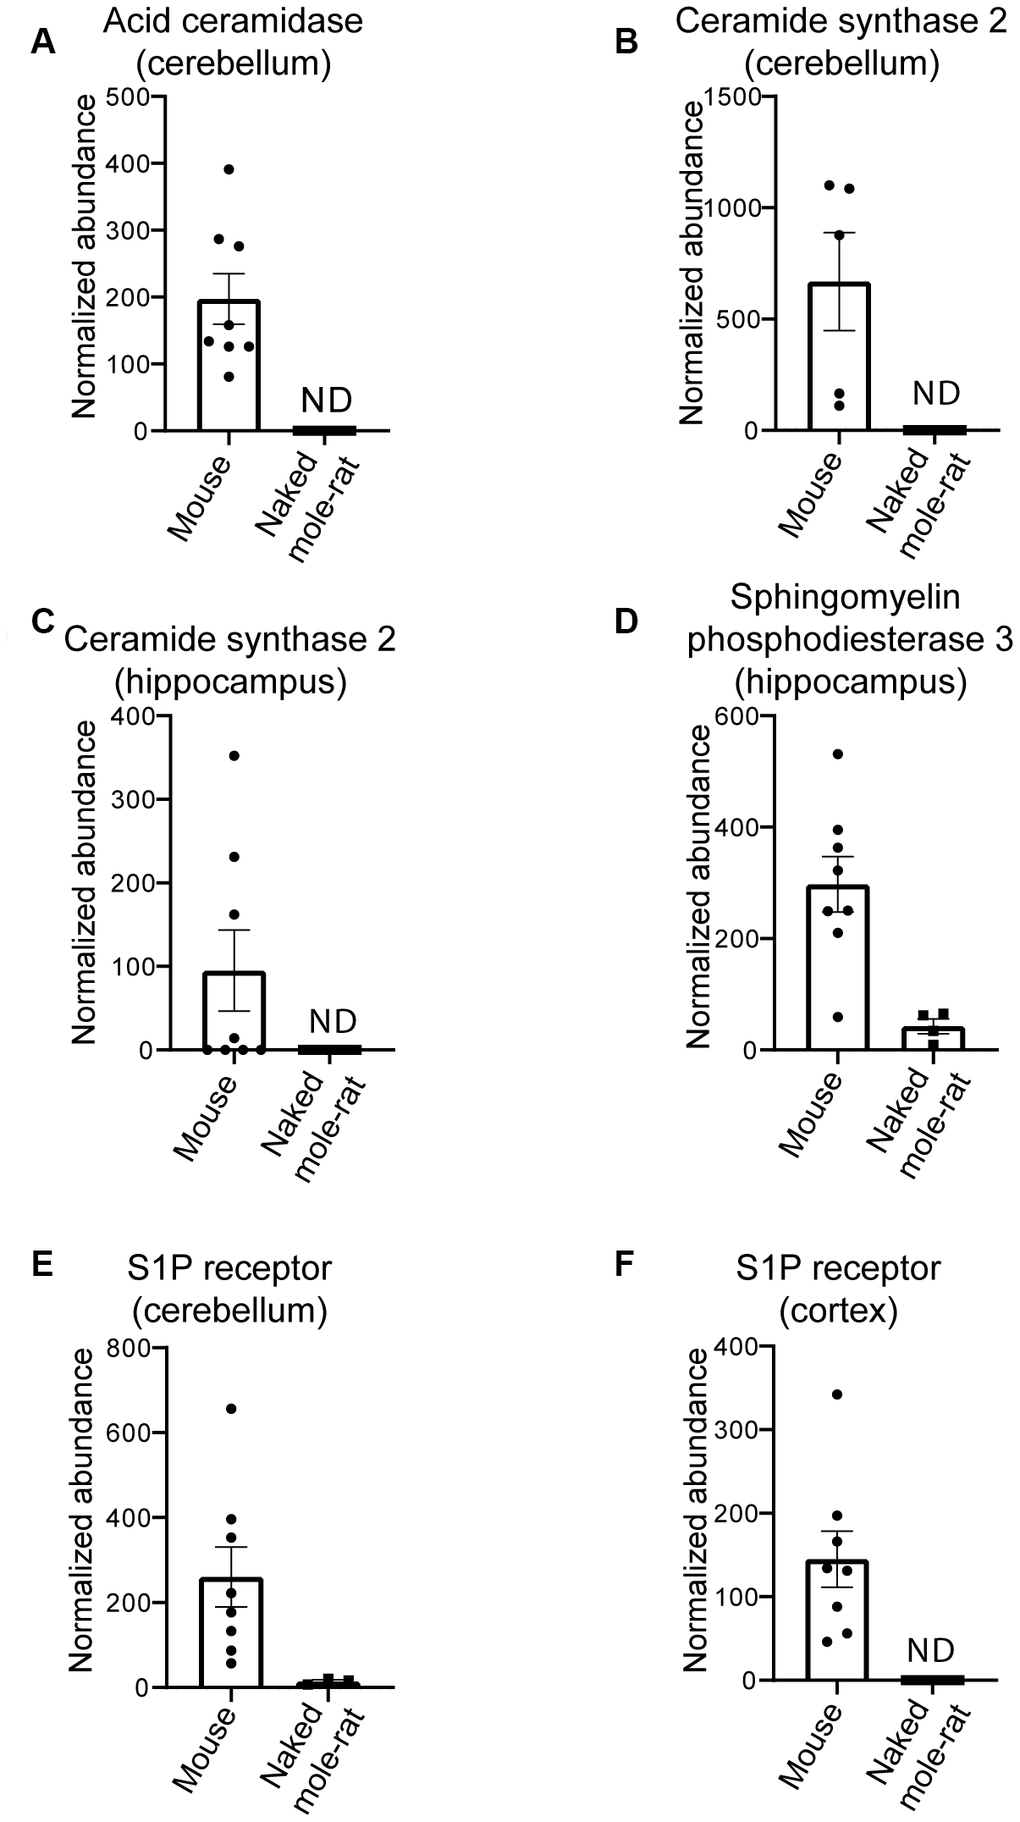 Differential proteins in mouse compared to naked mole-rats. (A) Differential levels of acid ceramidase in cerebellar tissue. Ceramide synthase 2 is decreased in naked mole-rat tissues in both the cerebellum (B) and hippocampus (C). Sphingosine phosphodiesterase 3, a member of the sphingomyelinase family (also called neutral sphingomyelinase 2) is decreased in naked mole-rat hippocampus (D) where sphingosine-1-phosphate receptor 1 is decreased in the cerebellum (E) and the cerebral cortex (F). ND indicates not detected or quantifiable. The homology between the two species, relative to mouse, was 81% (A), 90% (B), 91.3% (C) and 95% (D).